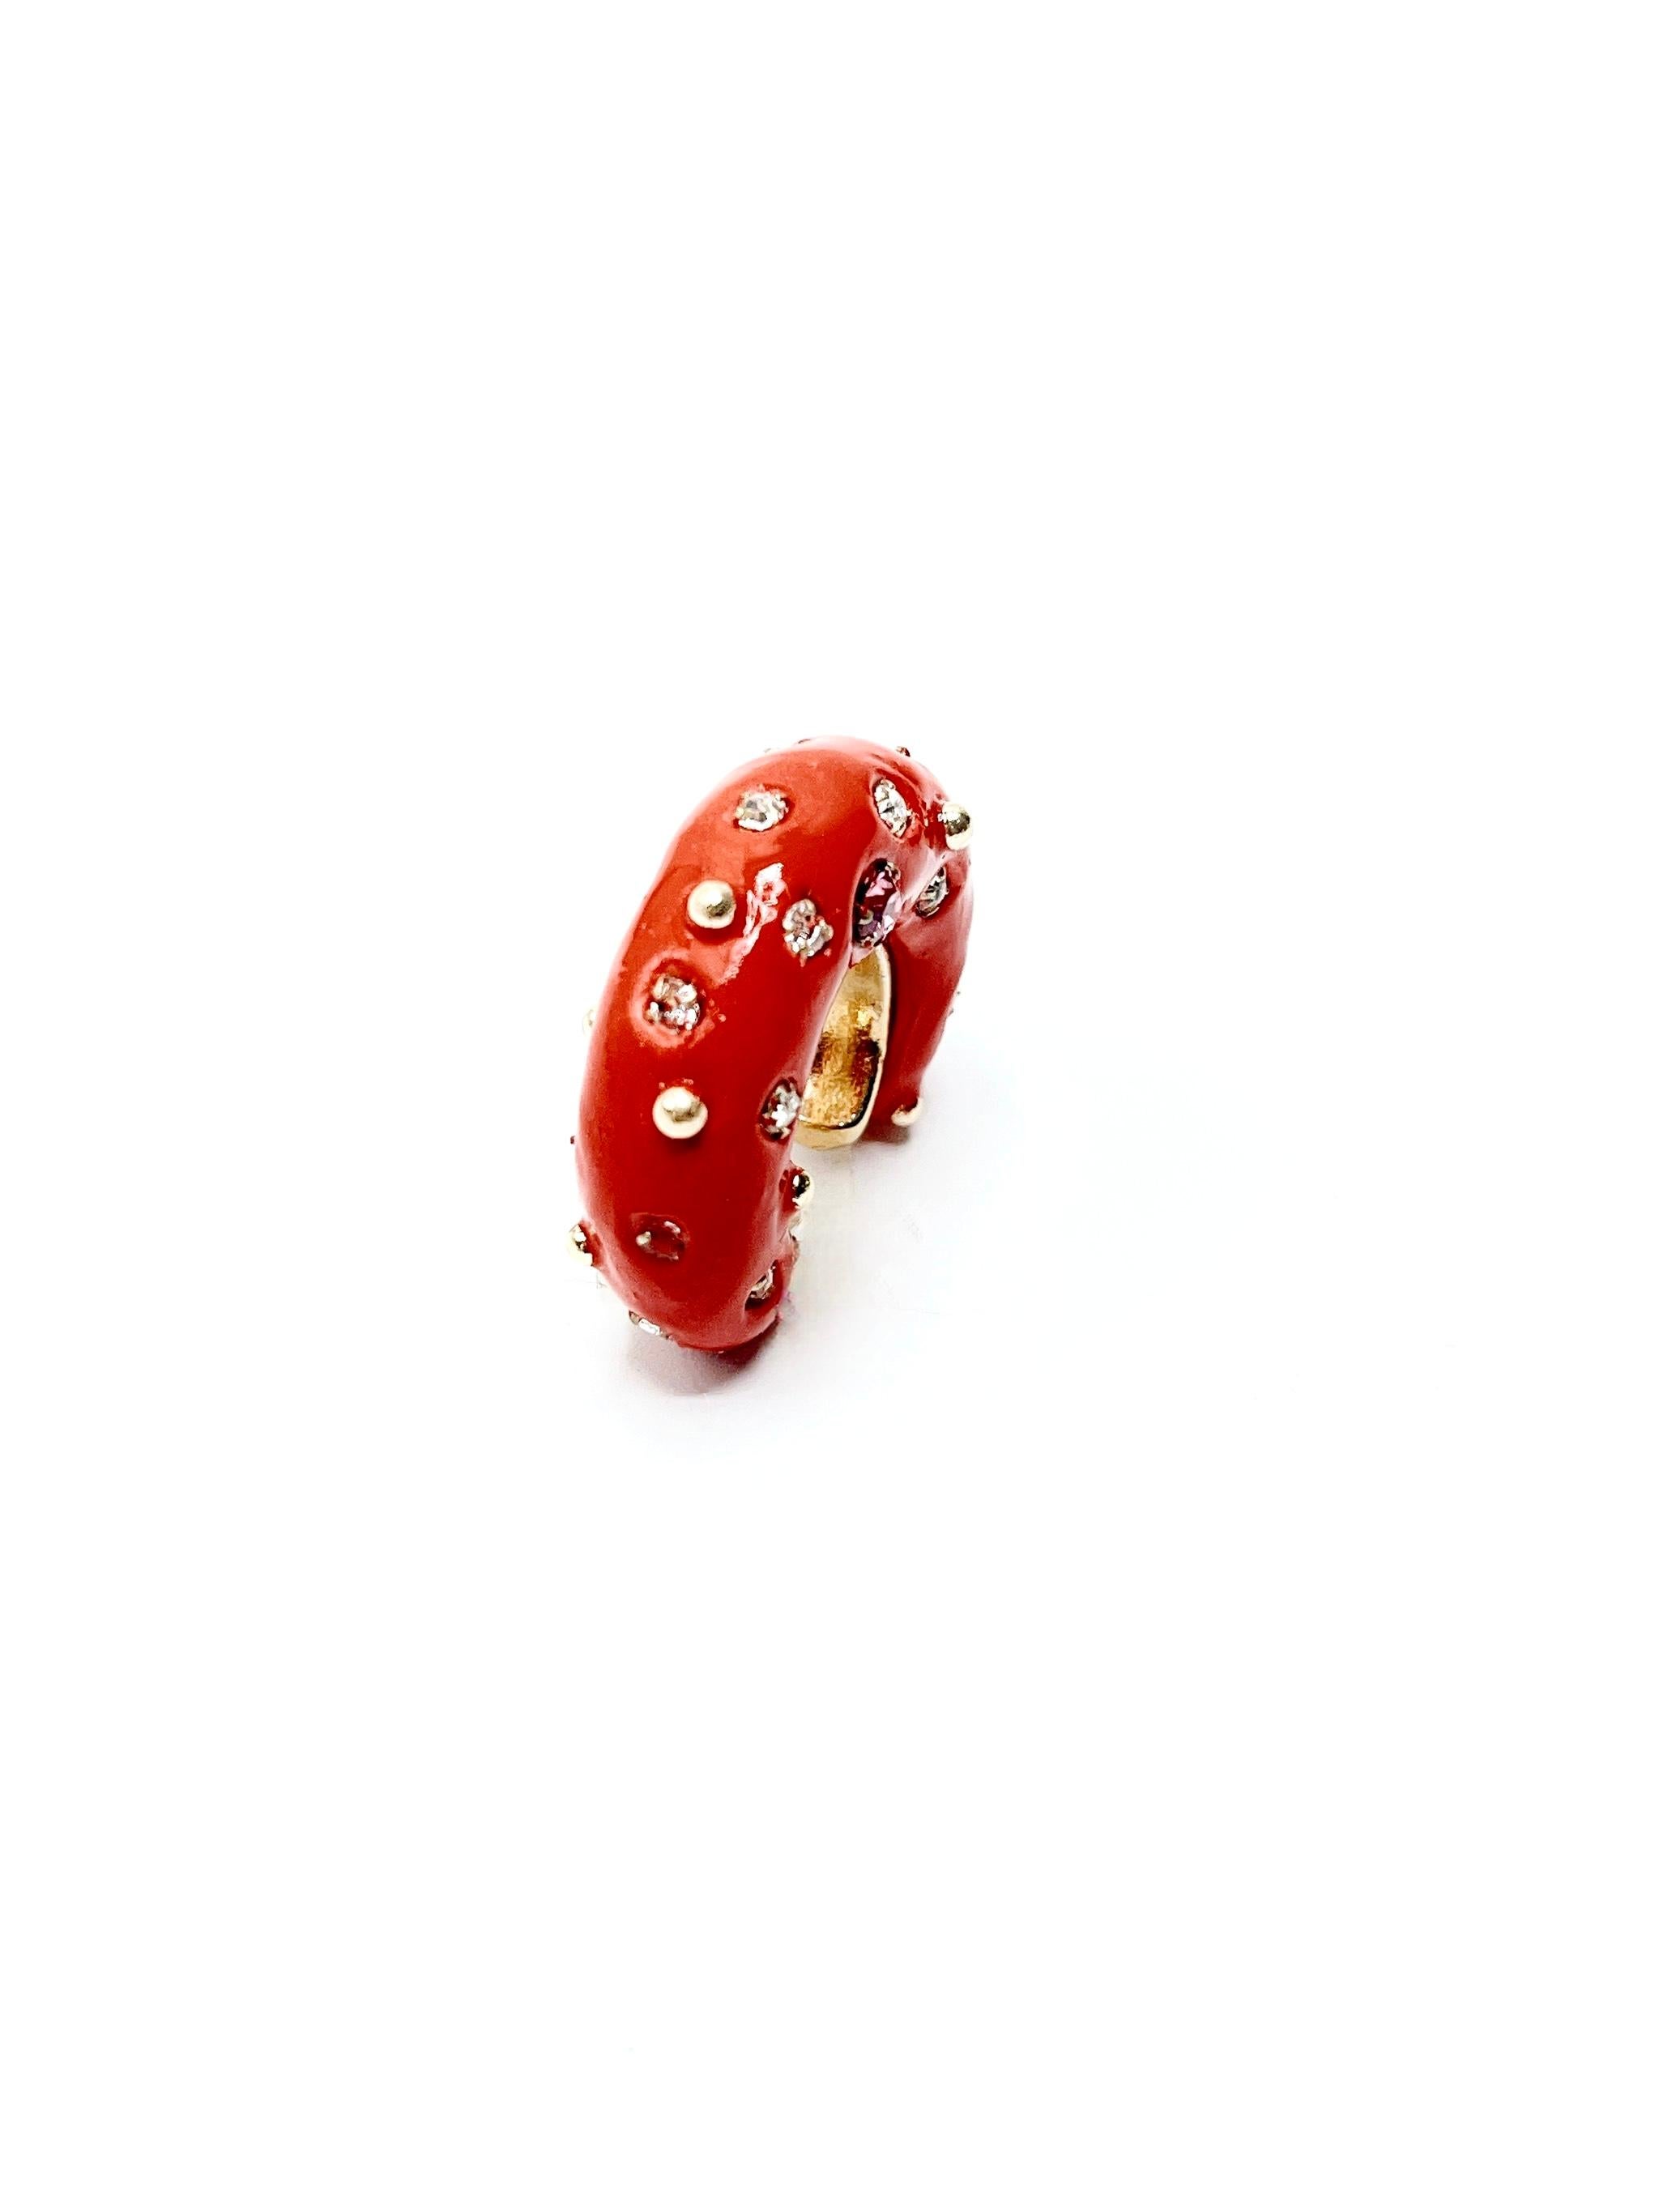 Work Serial No. 1110301235004
This item is Single Ear-cuff.

Hannayoo Works has created the Hand-Crafted Ear-Objects.
 Teardrops ear cuffs were found passing the Pandemic, hoping all tears turn to happiness. The primary material of the Objects is